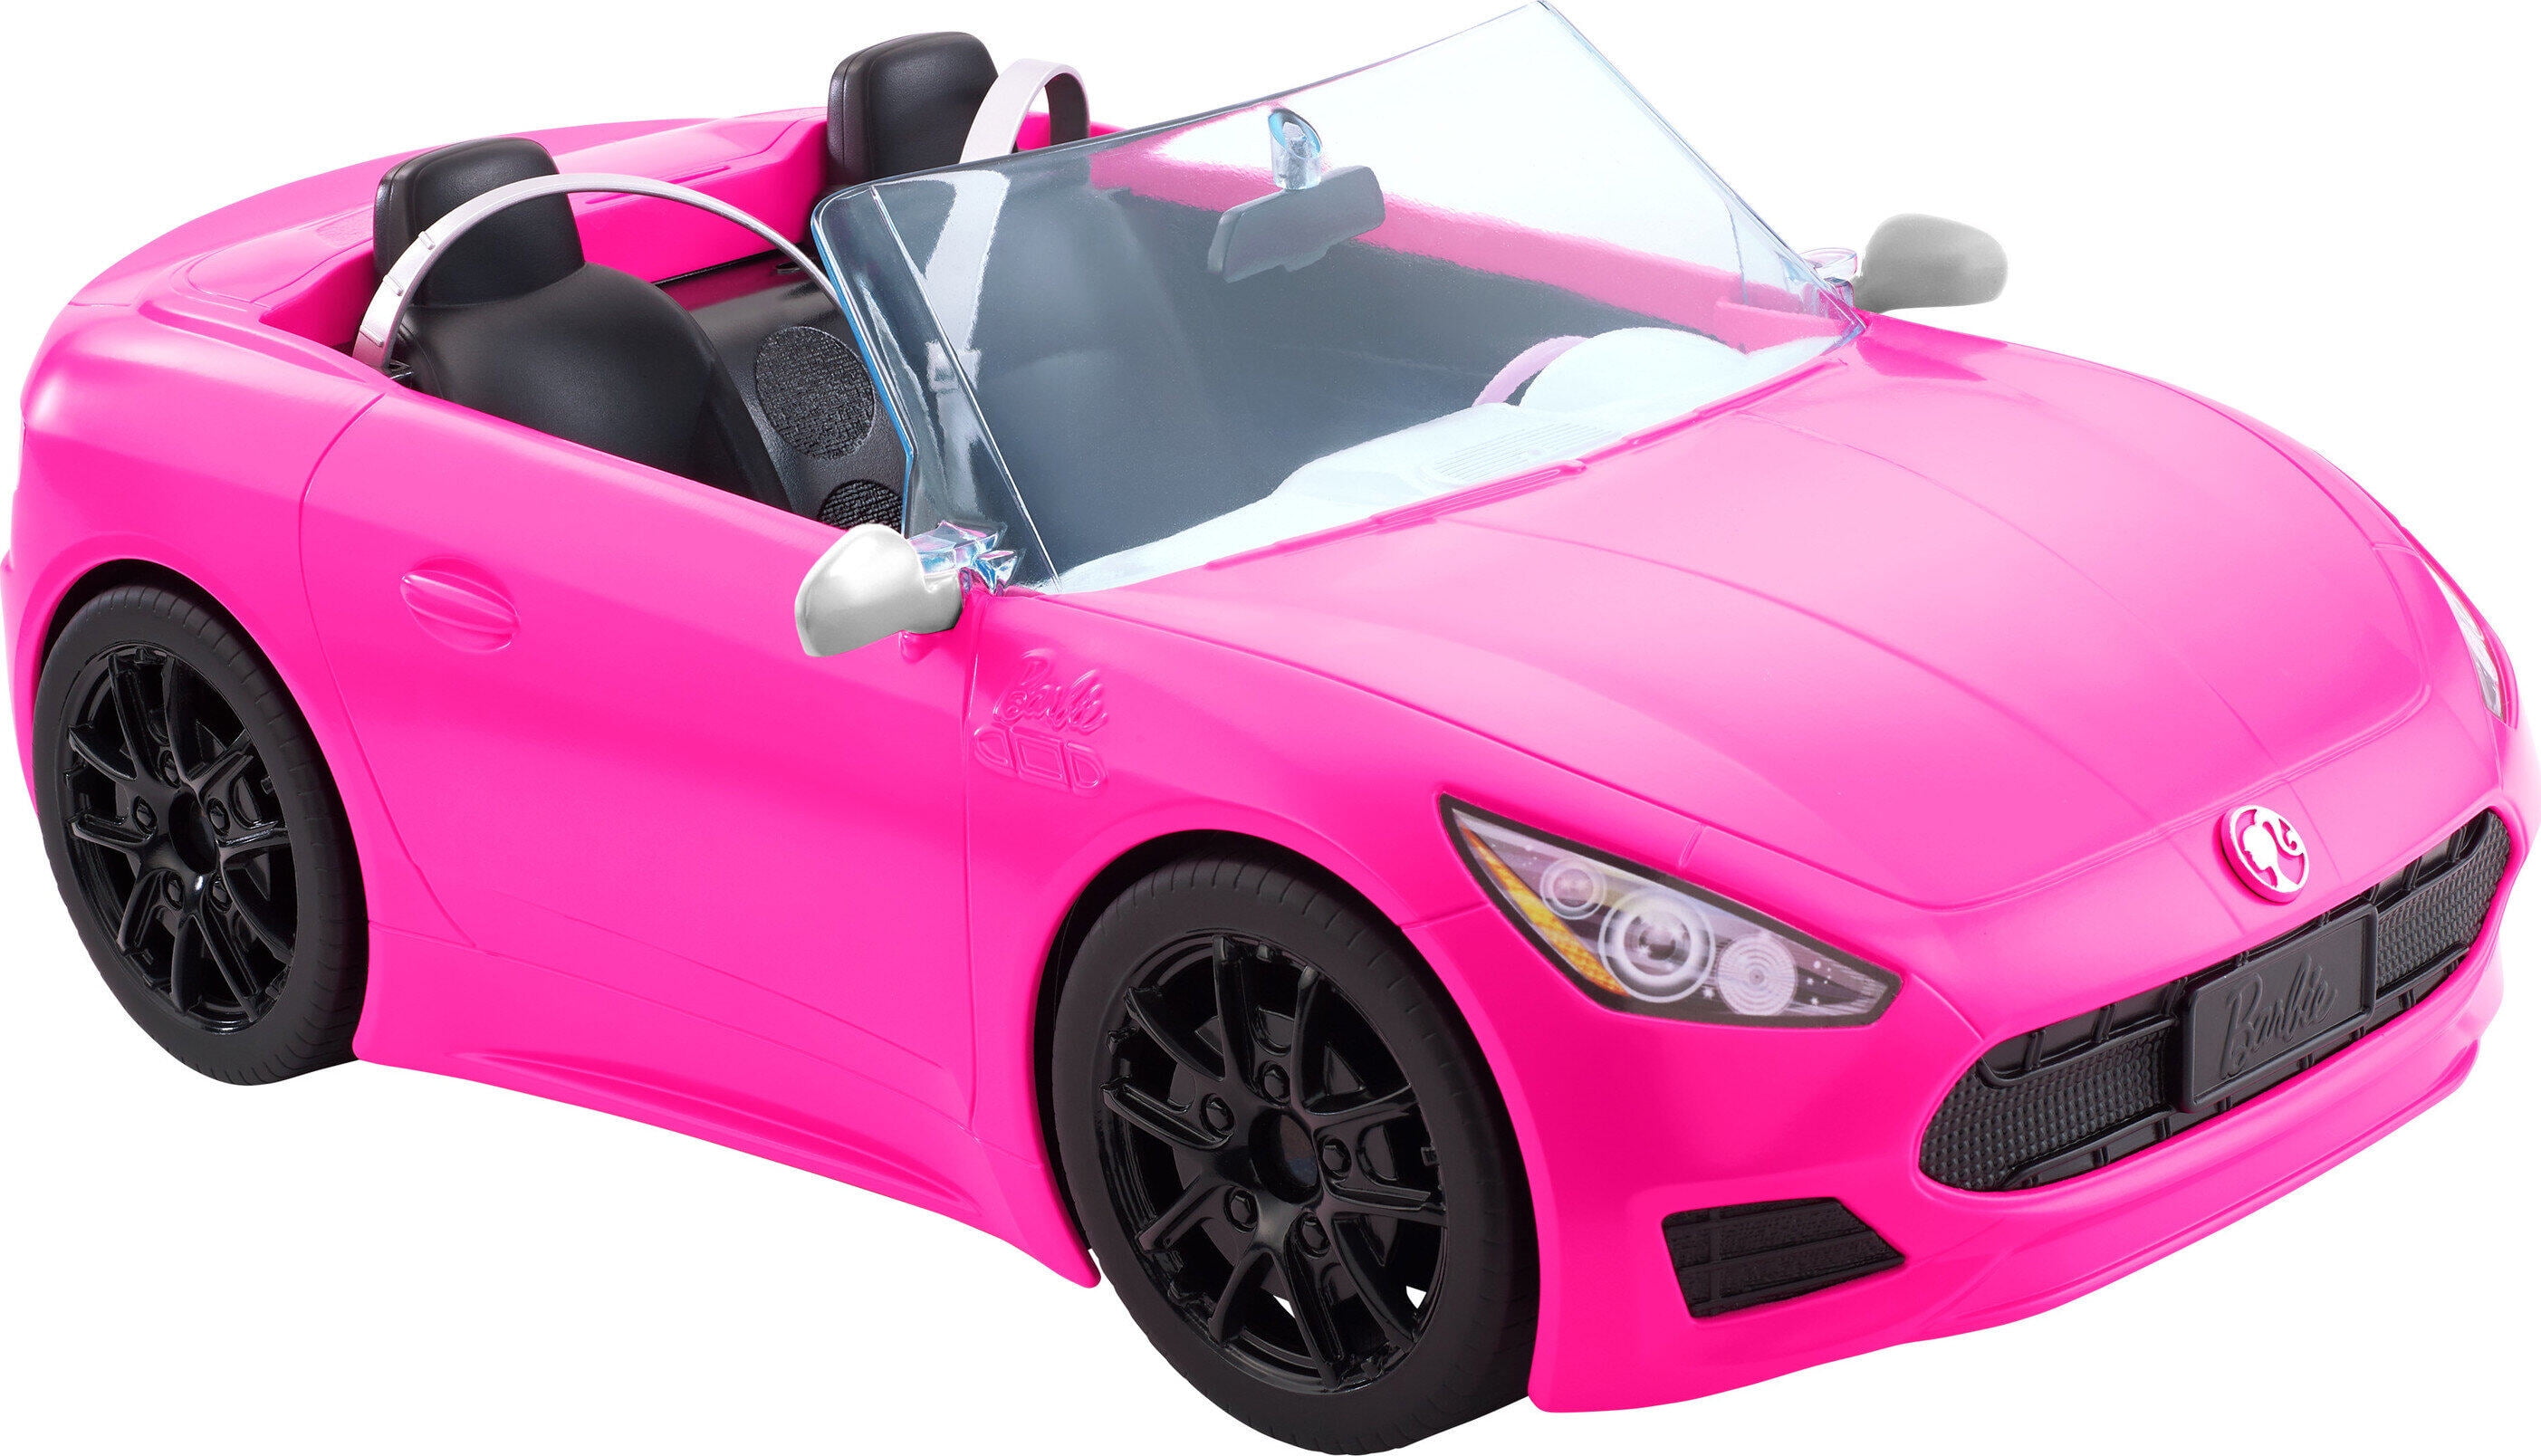 Opmærksom Udvej Stuepige Barbie Convertible Toy Car, Bright Pink with Seatbelts and Rolling Wheels  (Seats 2 Dolls) - Walmart.com